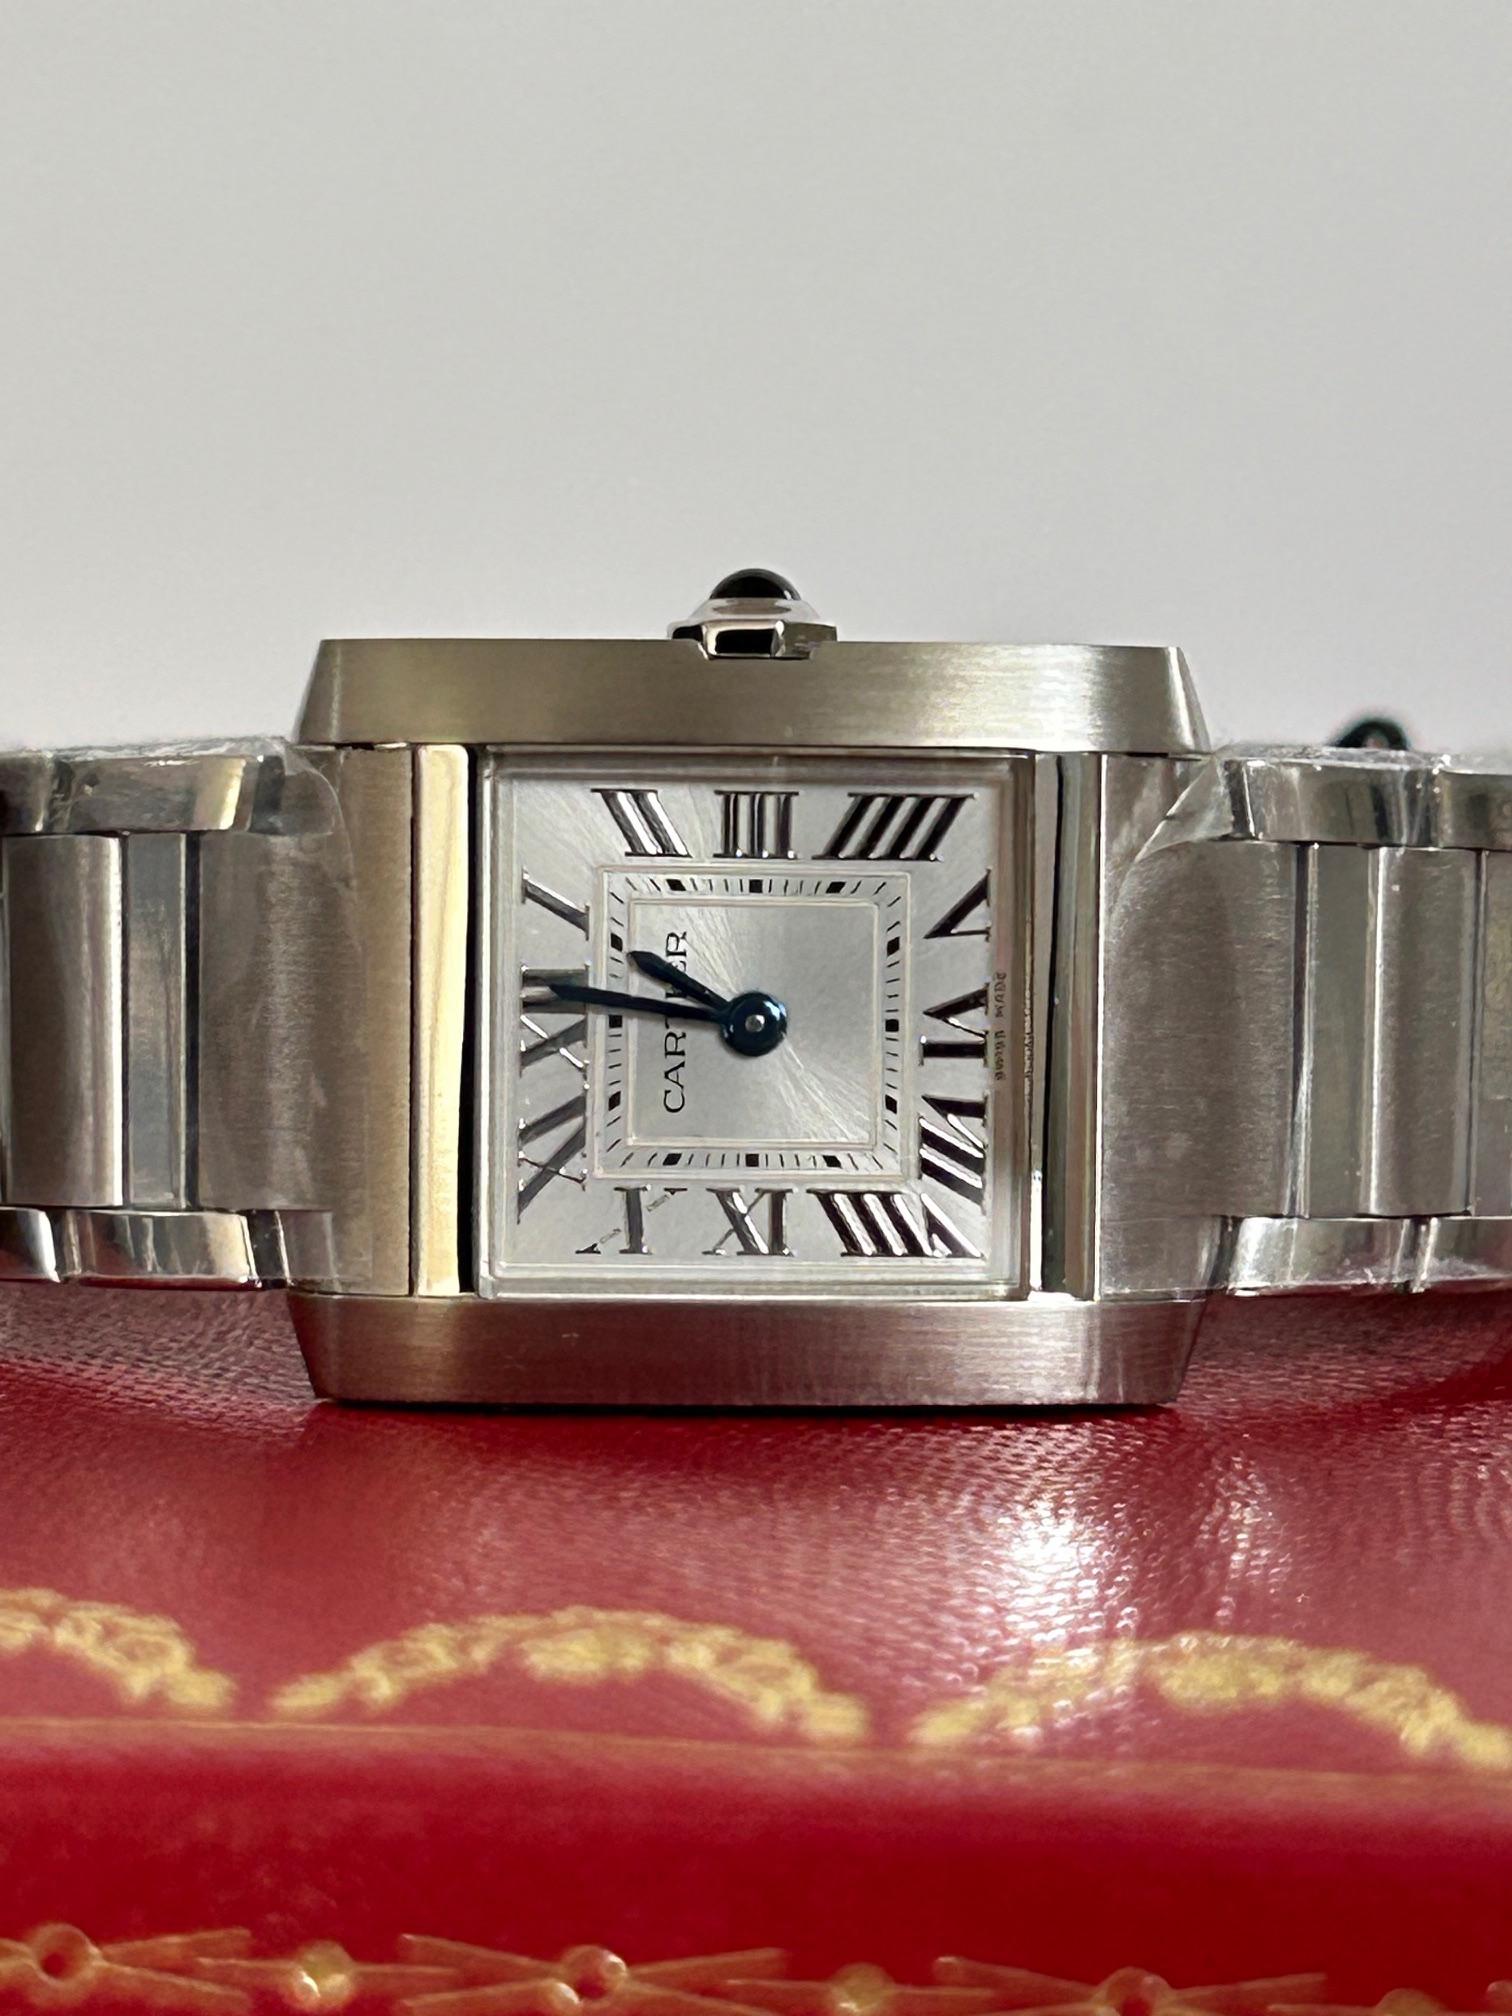 Our partially factory sealed ladies Cartier Tank Francaise Small size , reference WSTA0065 is the latest (and very sought after) version of the classic Tank Francaise, with silver sun ray dial. The stainless steel case measures 25.7mm x 21.2mm and